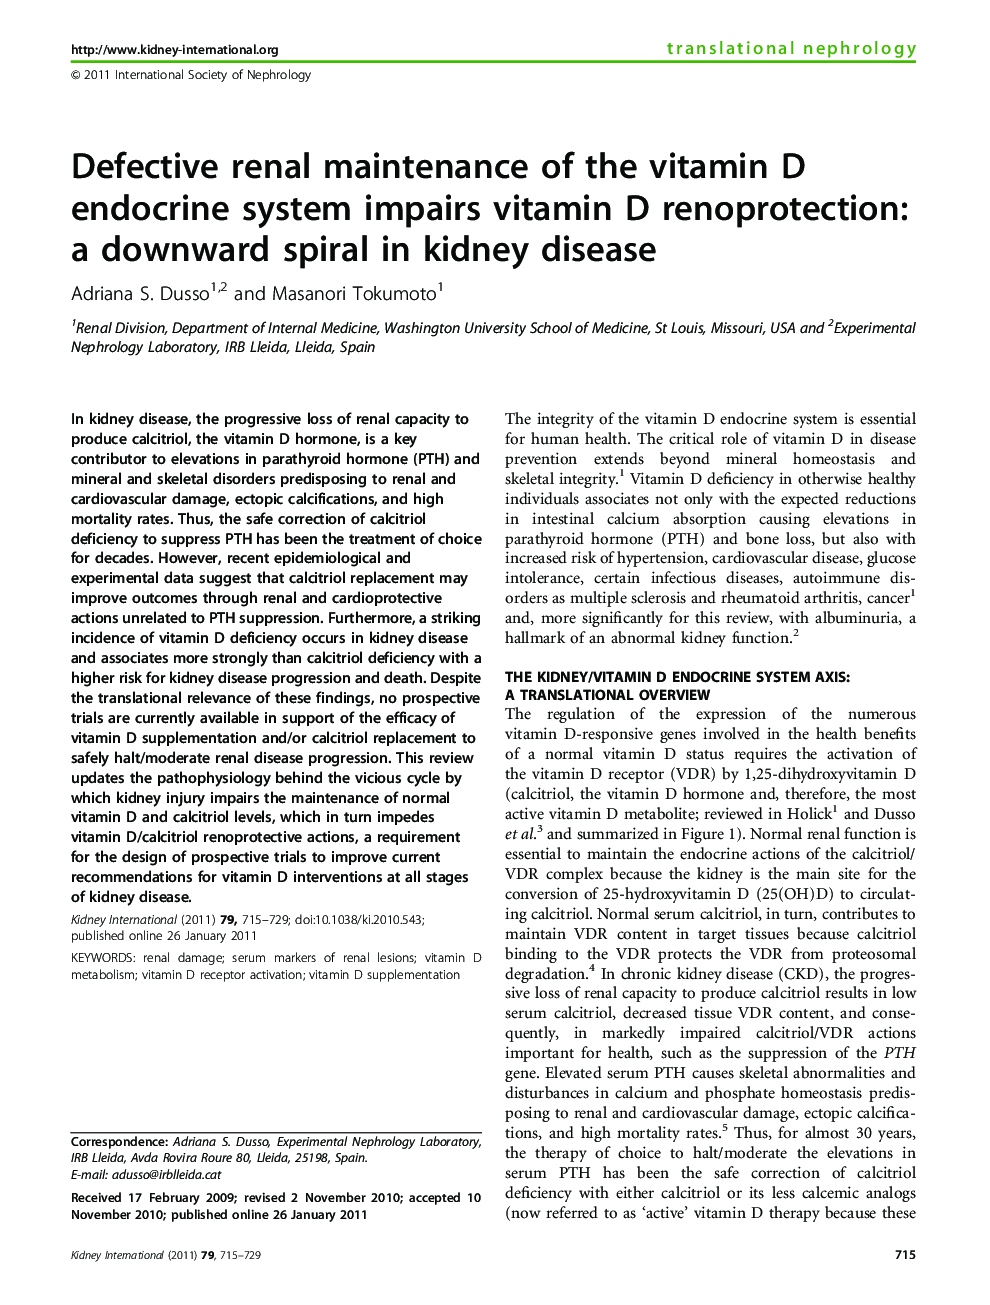 Defective renal maintenance of the vitamin D endocrine system impairs vitamin D renoprotection: a downward spiral in kidney disease 